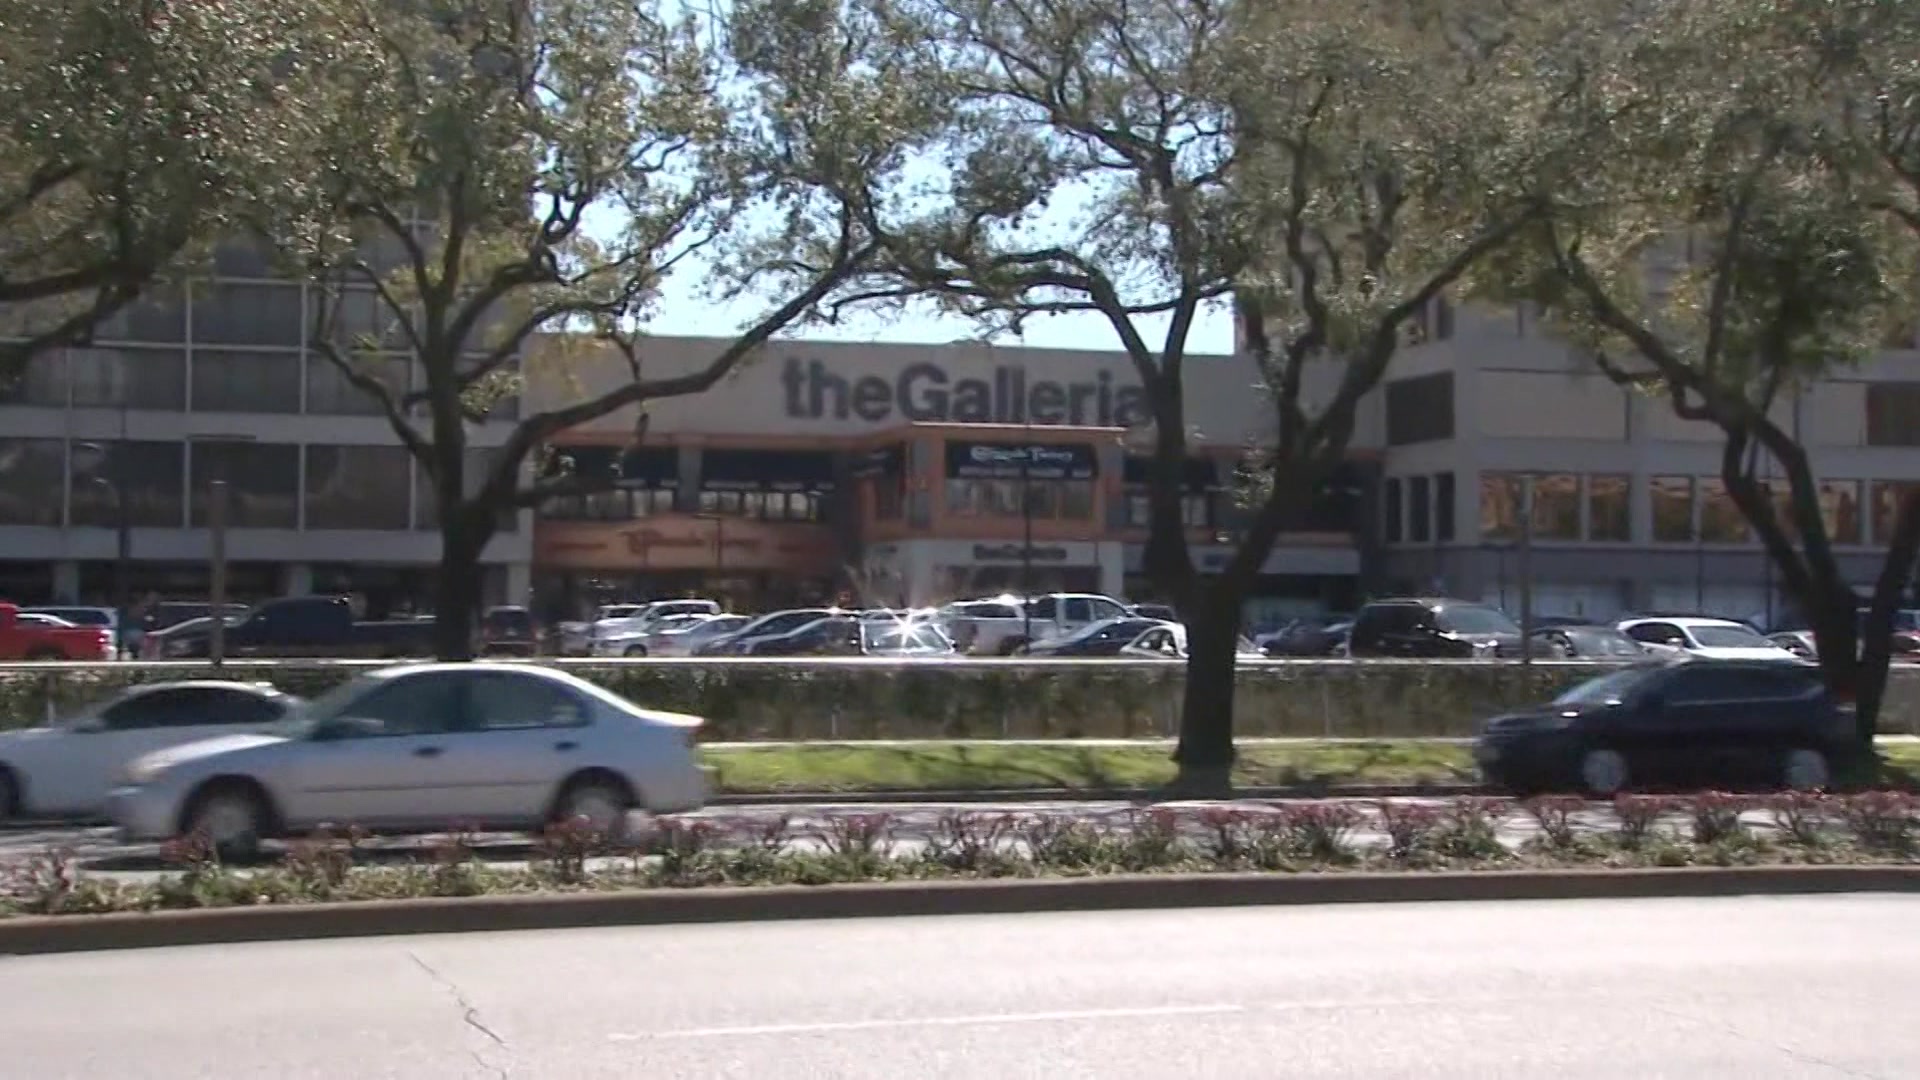 The Galleria Opens a Fancy New Wing of Restaurants and Stores